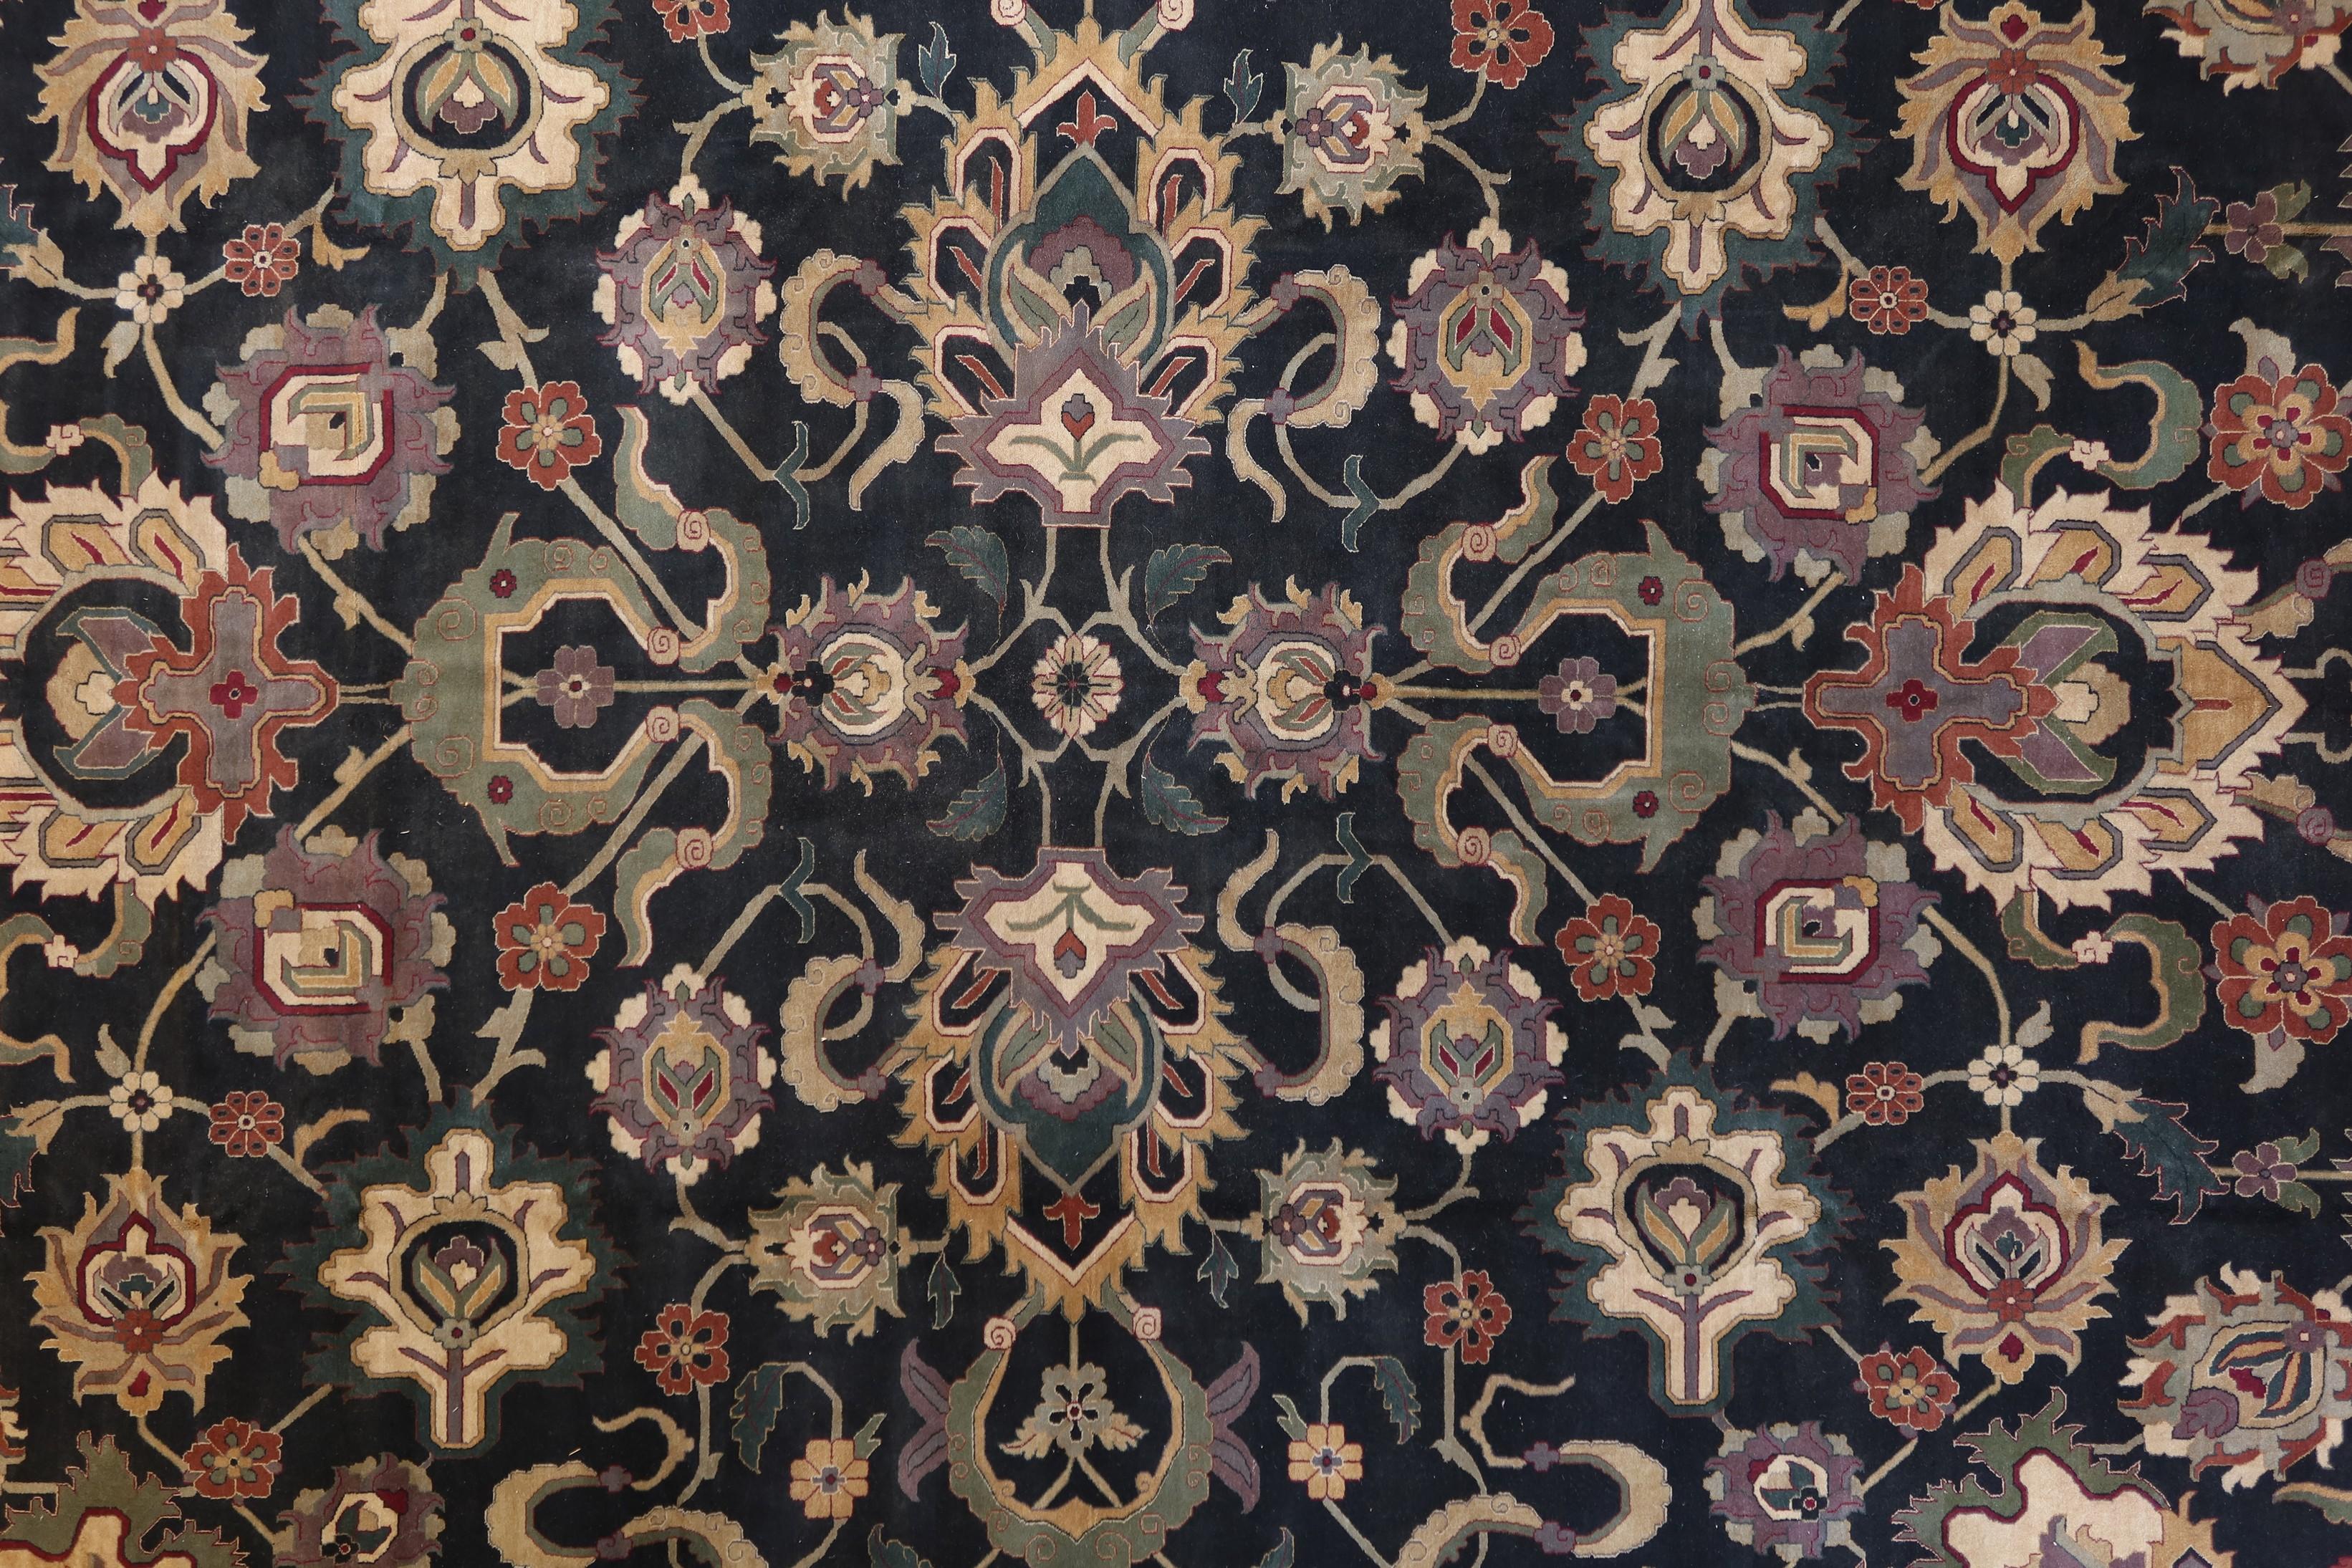 The Woven Arts rug collection is a highly accurate recreation of the original India Agra Court rugs of the 17th century and 18th century. High quality New Zealand yarn is finely hand-knotted to create these luxury rugs that are unusually high